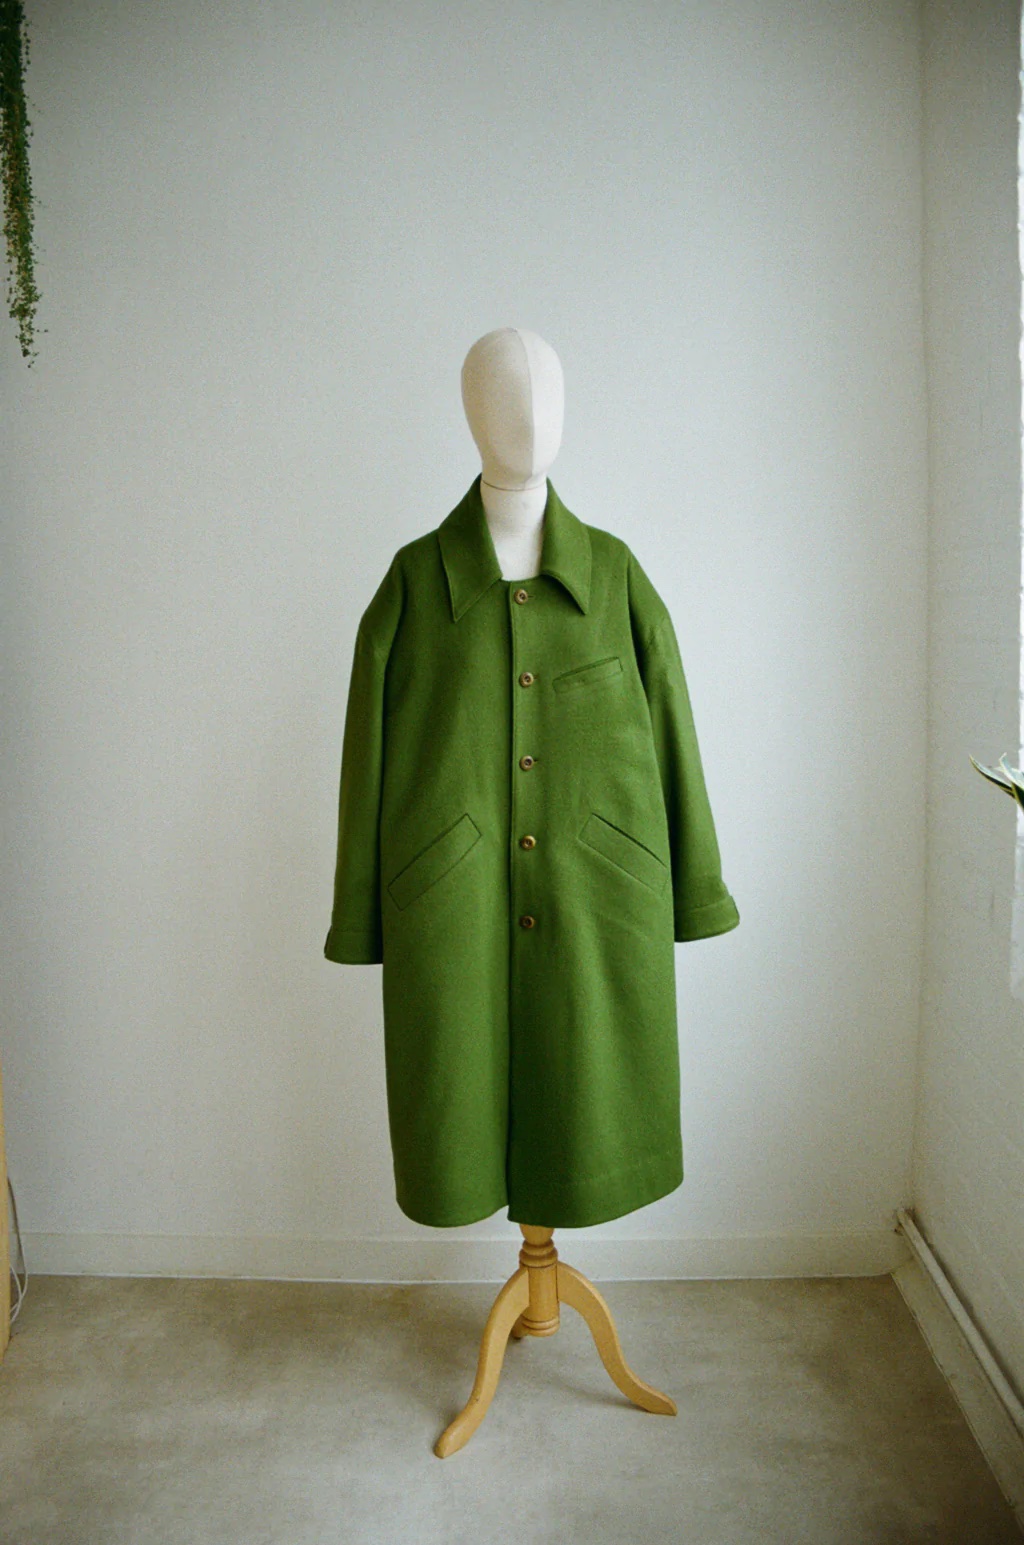 The Modern Sewing Co Darcy Coat - The Fold Line